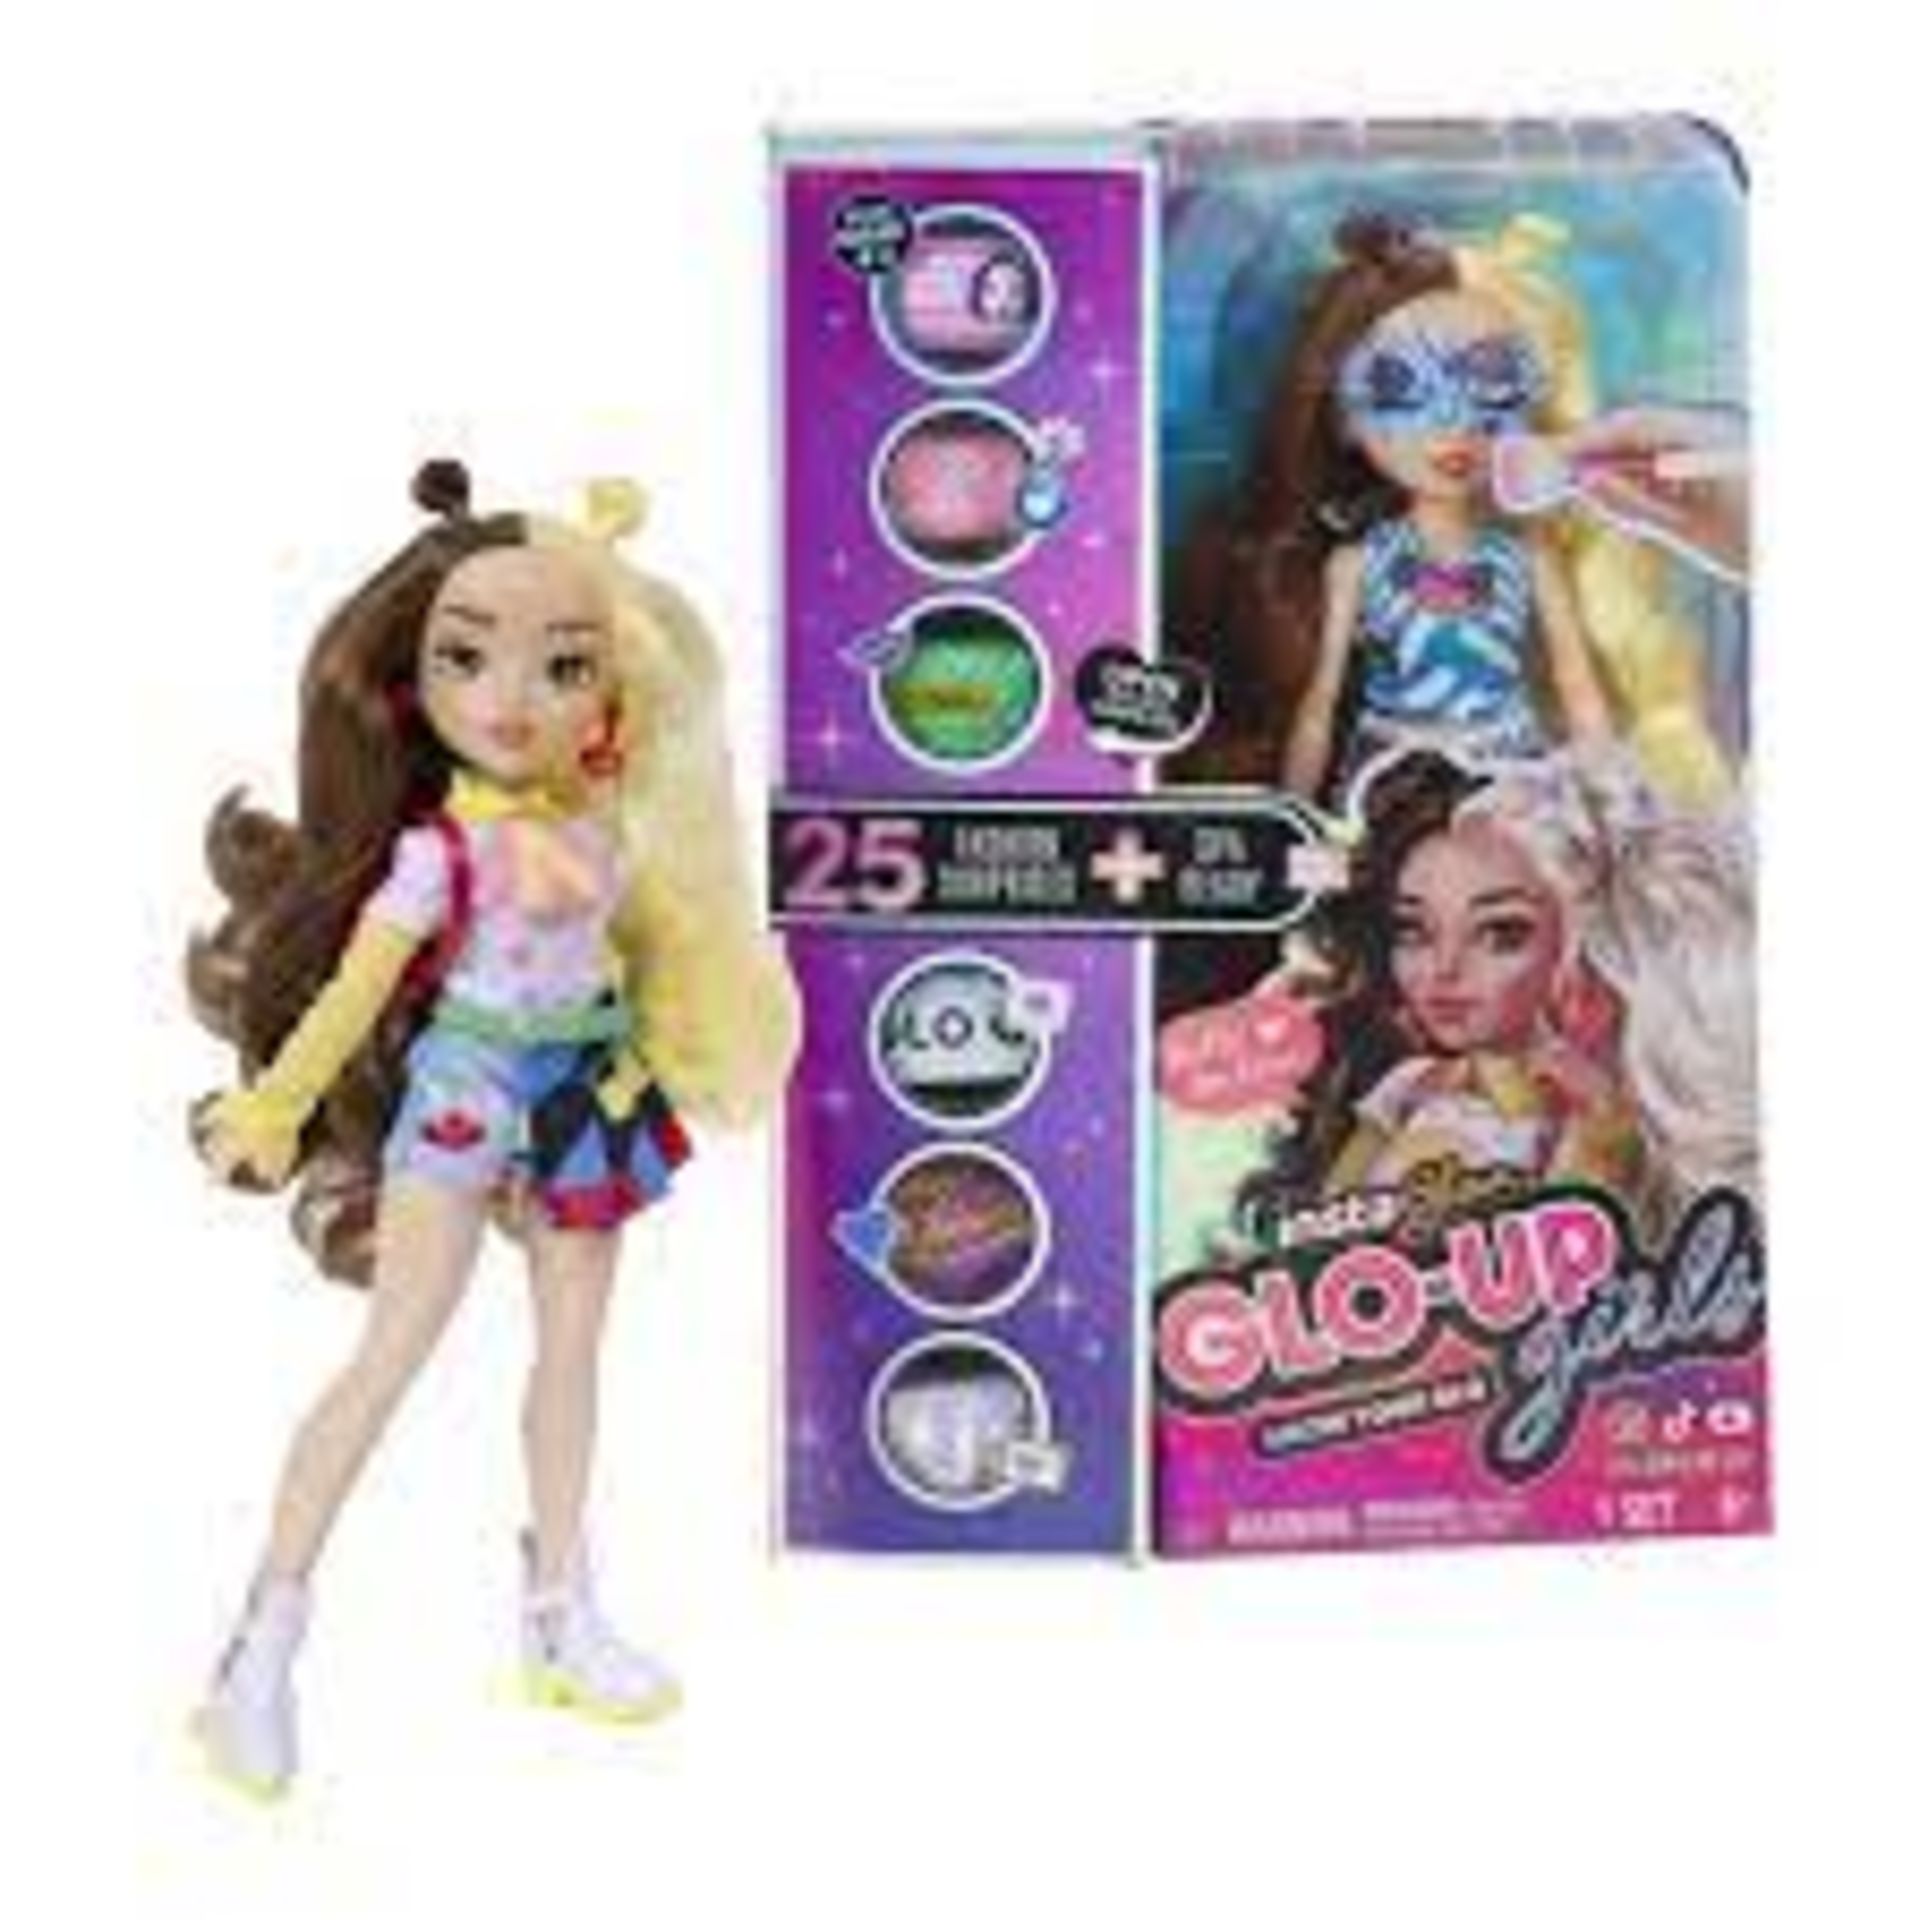 630 X BRAND NEW PIECES OF BRANDED TOYS INCLUDING LOL SURPRISE DOLL SERIES, DESIGN A FRIEND SLEEPOVER - Image 17 of 17